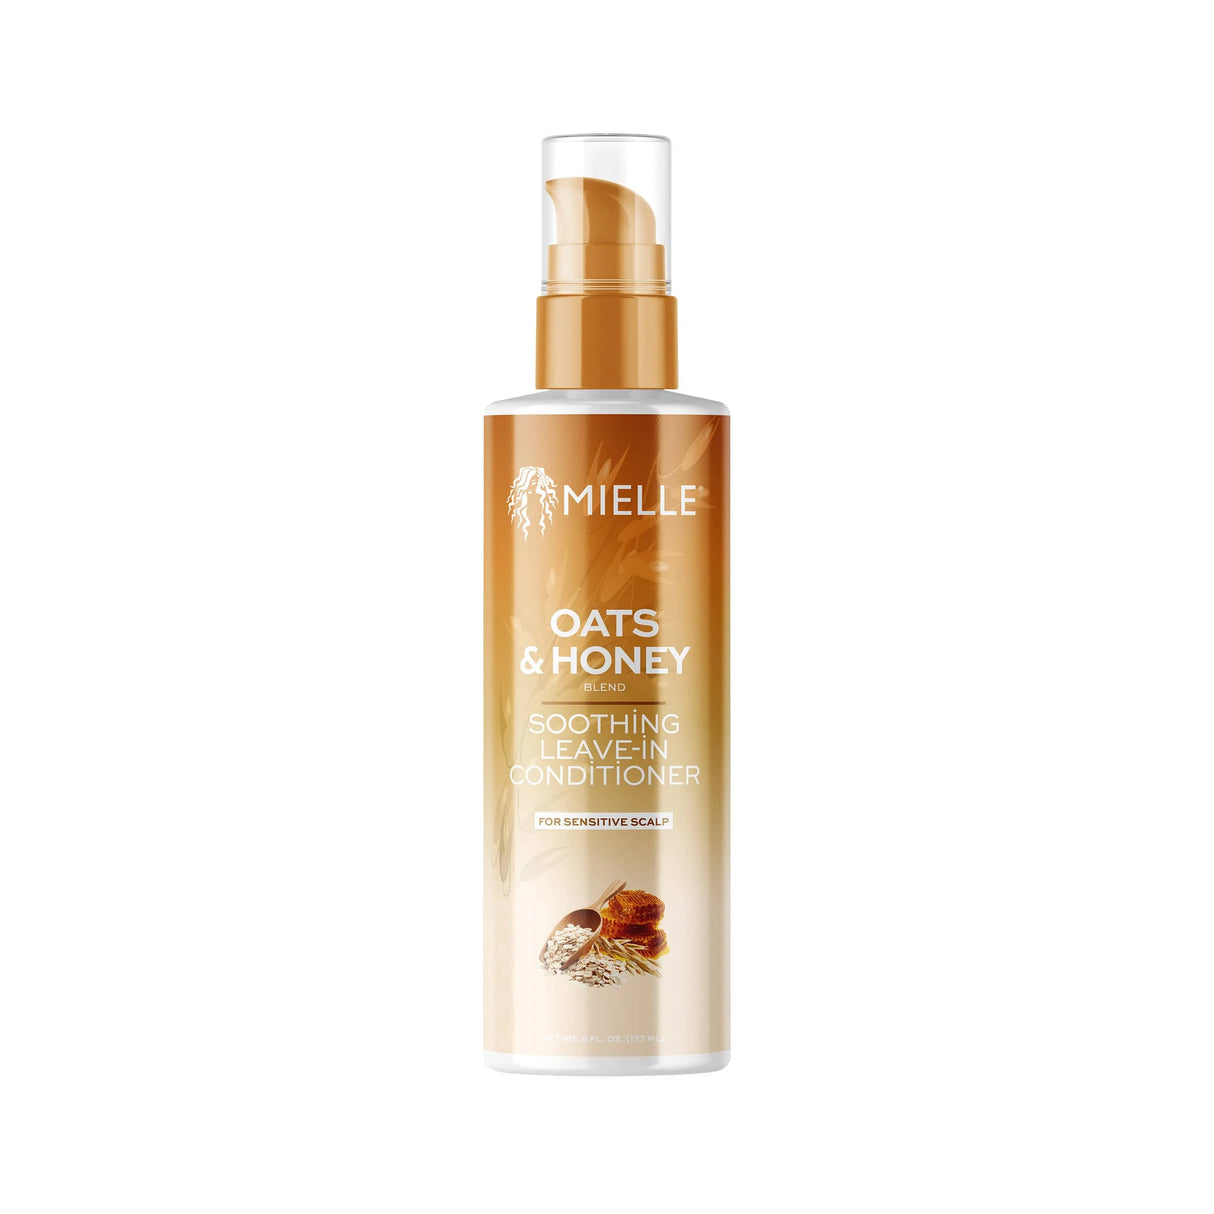 Mielle® Oats & Honey Soothing Leave-In Conditioner